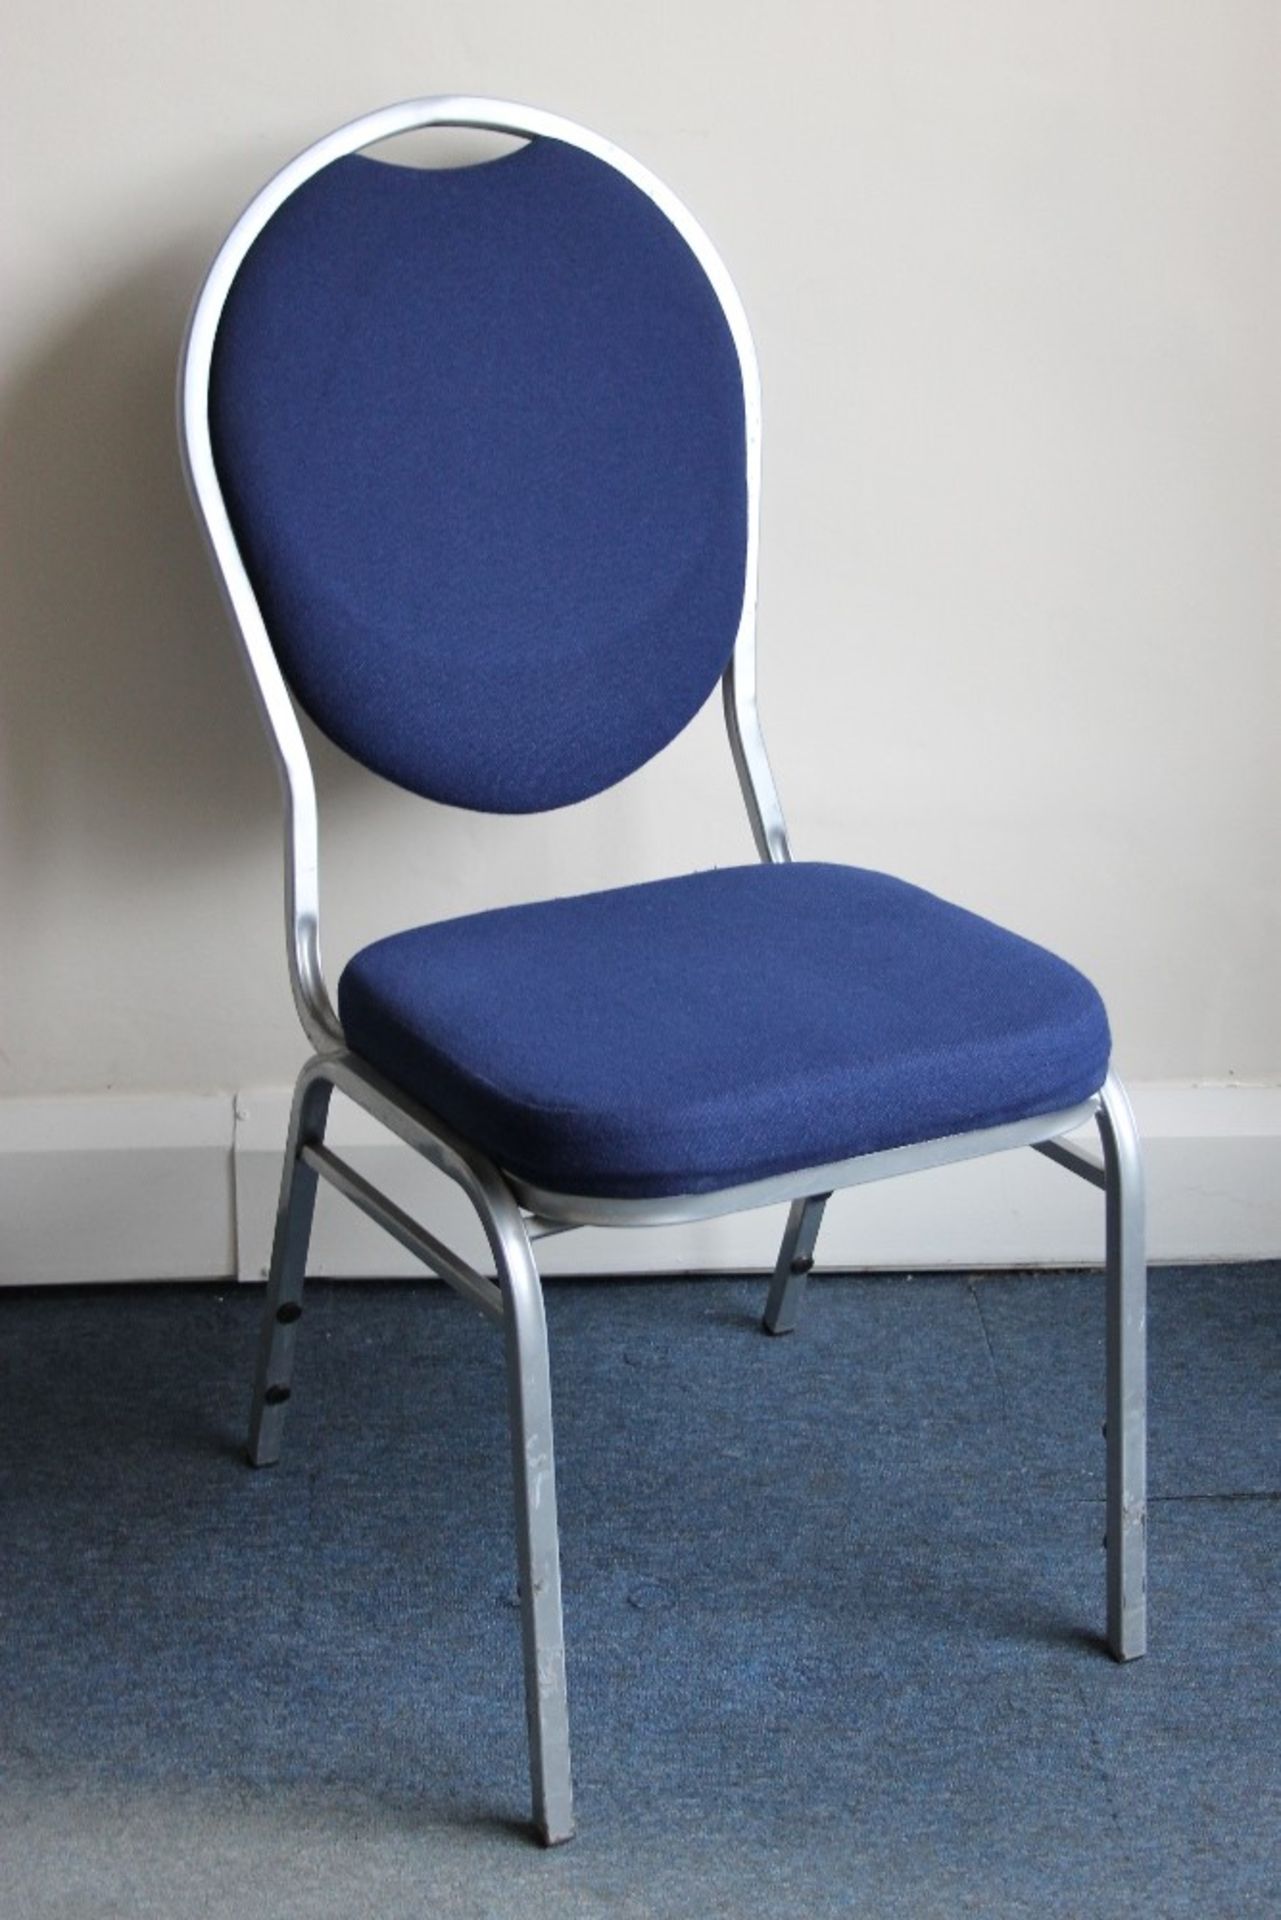 24 x Blue Conference / Dining Chairs - Image 2 of 3